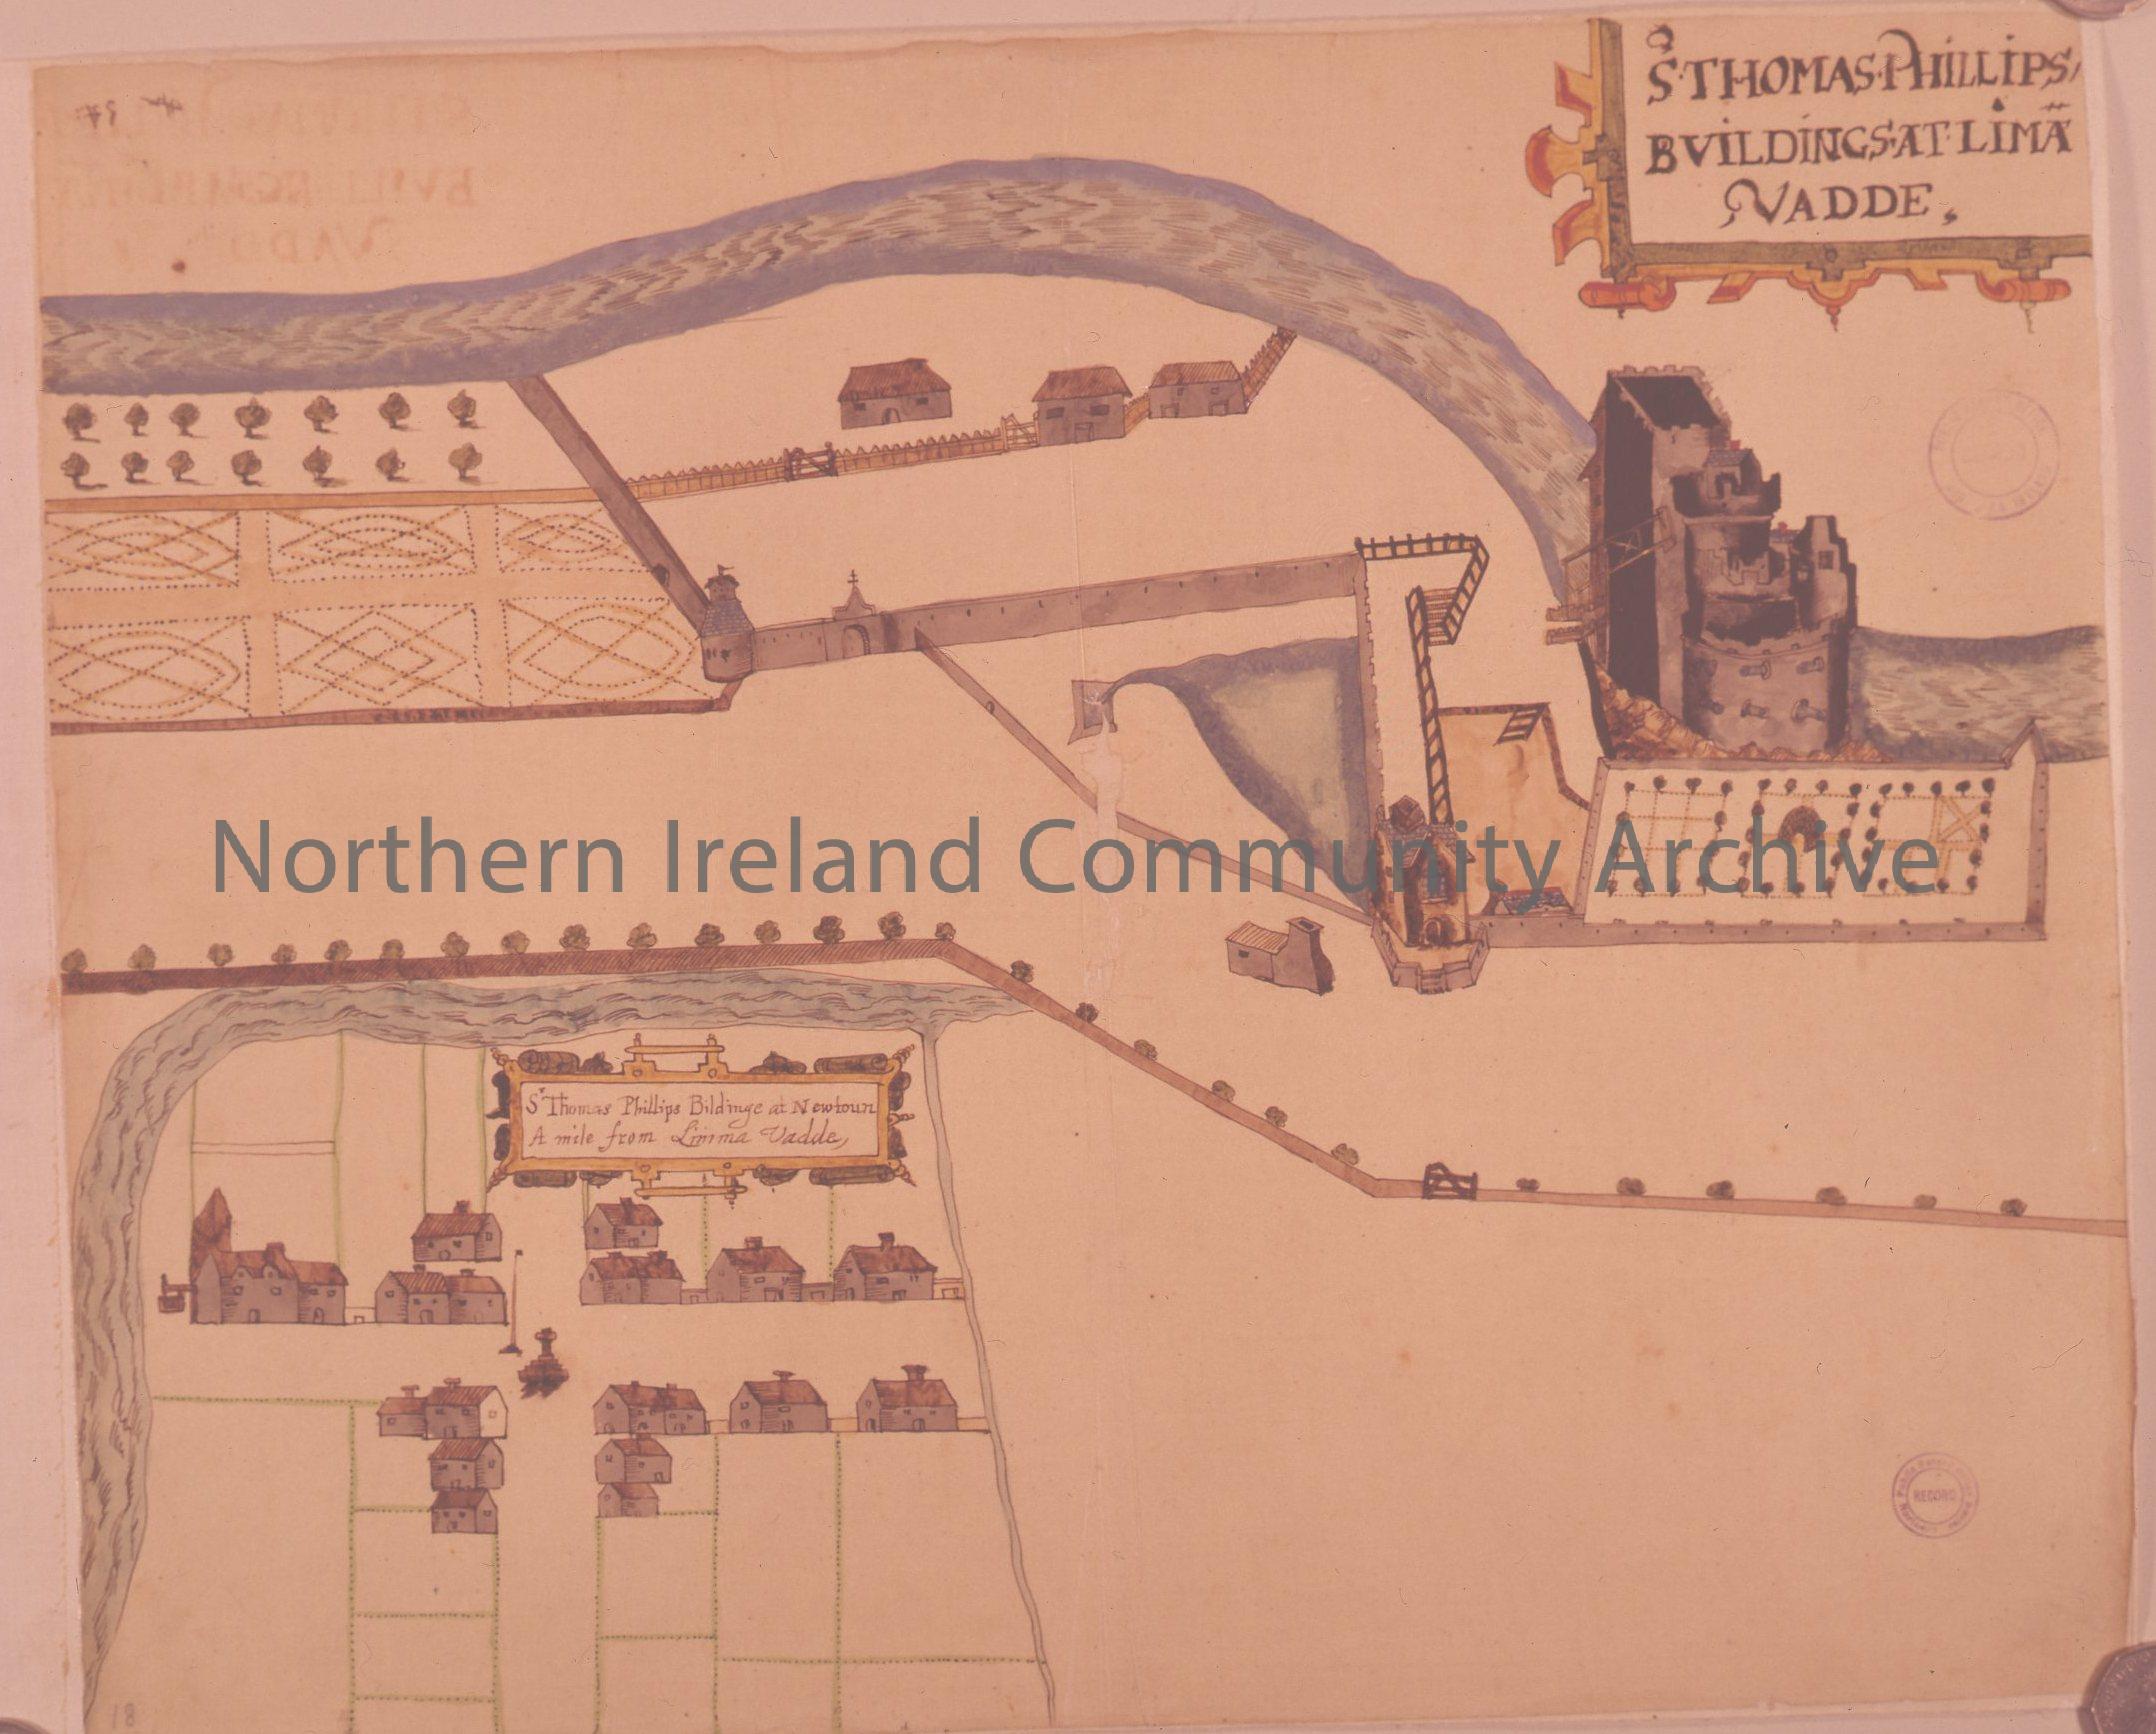 Raven’s 1622 map of Thomas Phillip’s buildings at Limavady